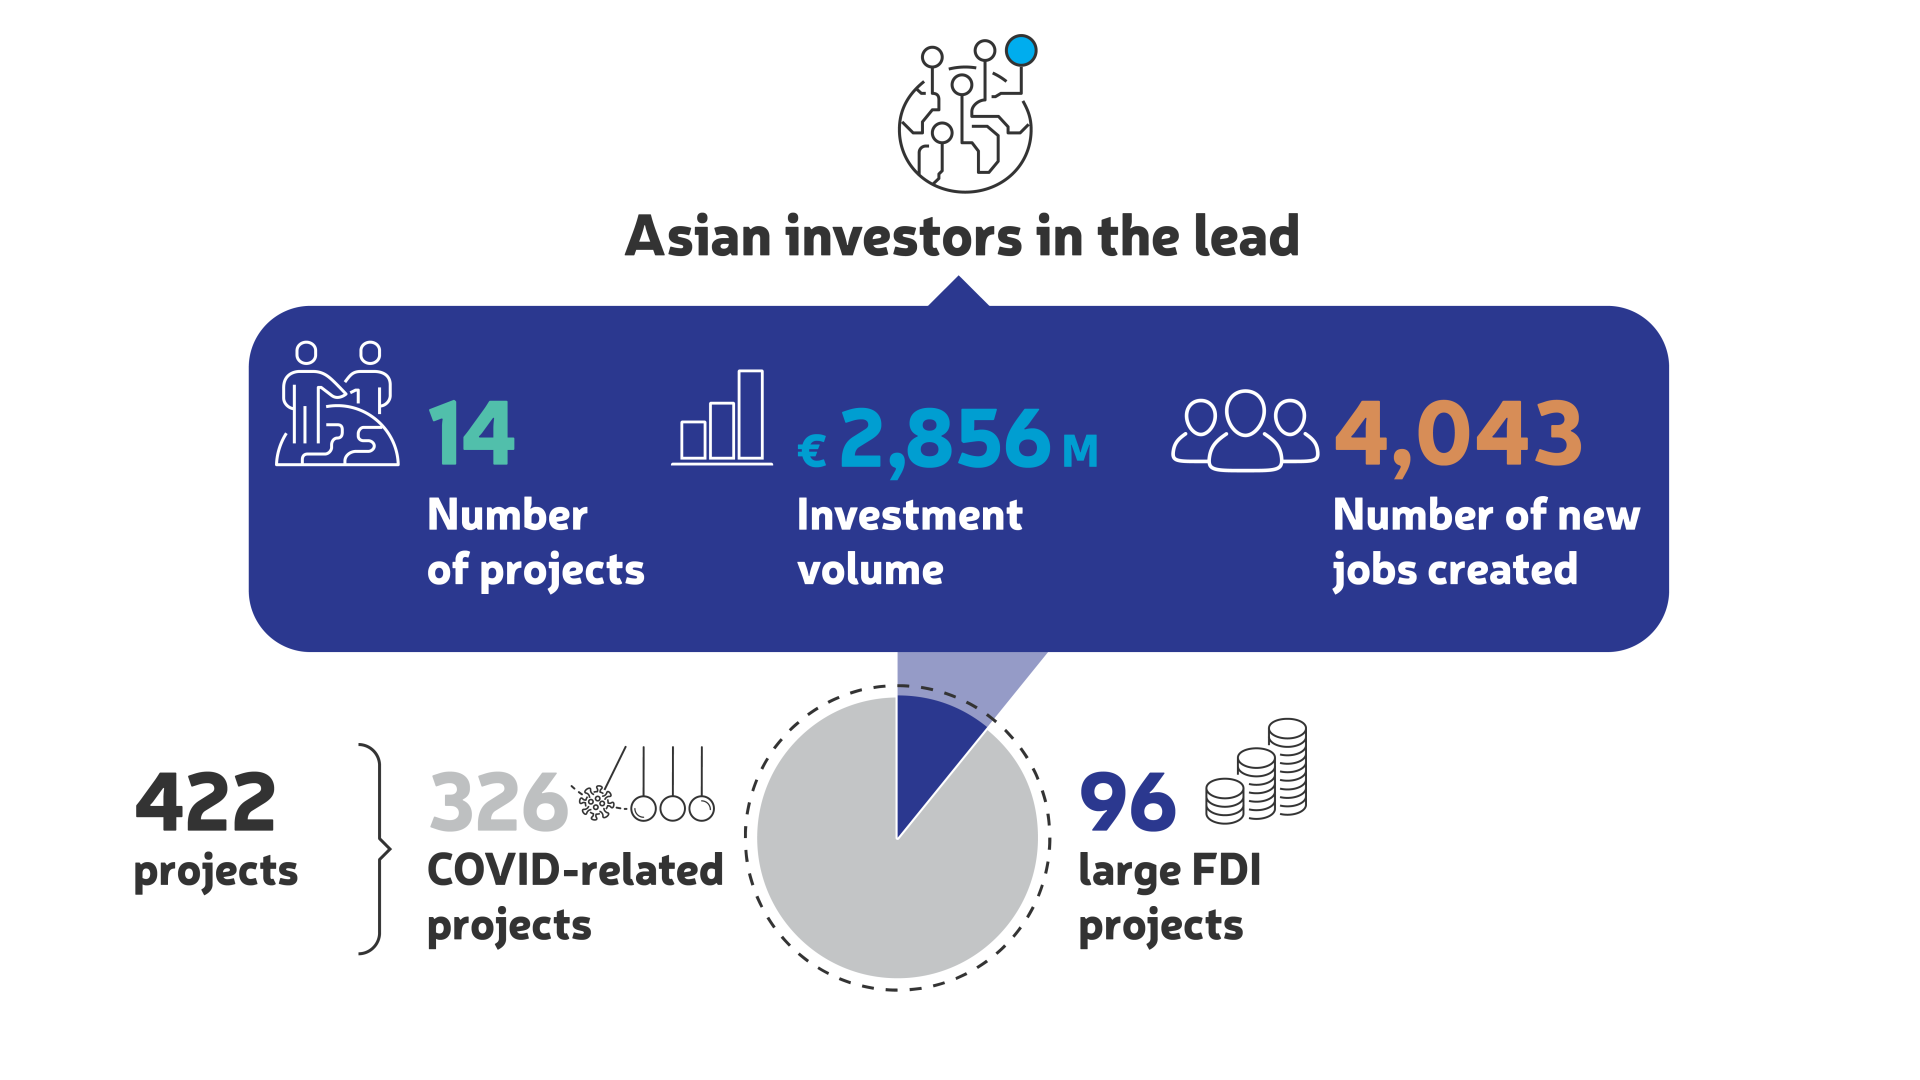 Large FDI projects: Eastern investors switched into even higher gear than before